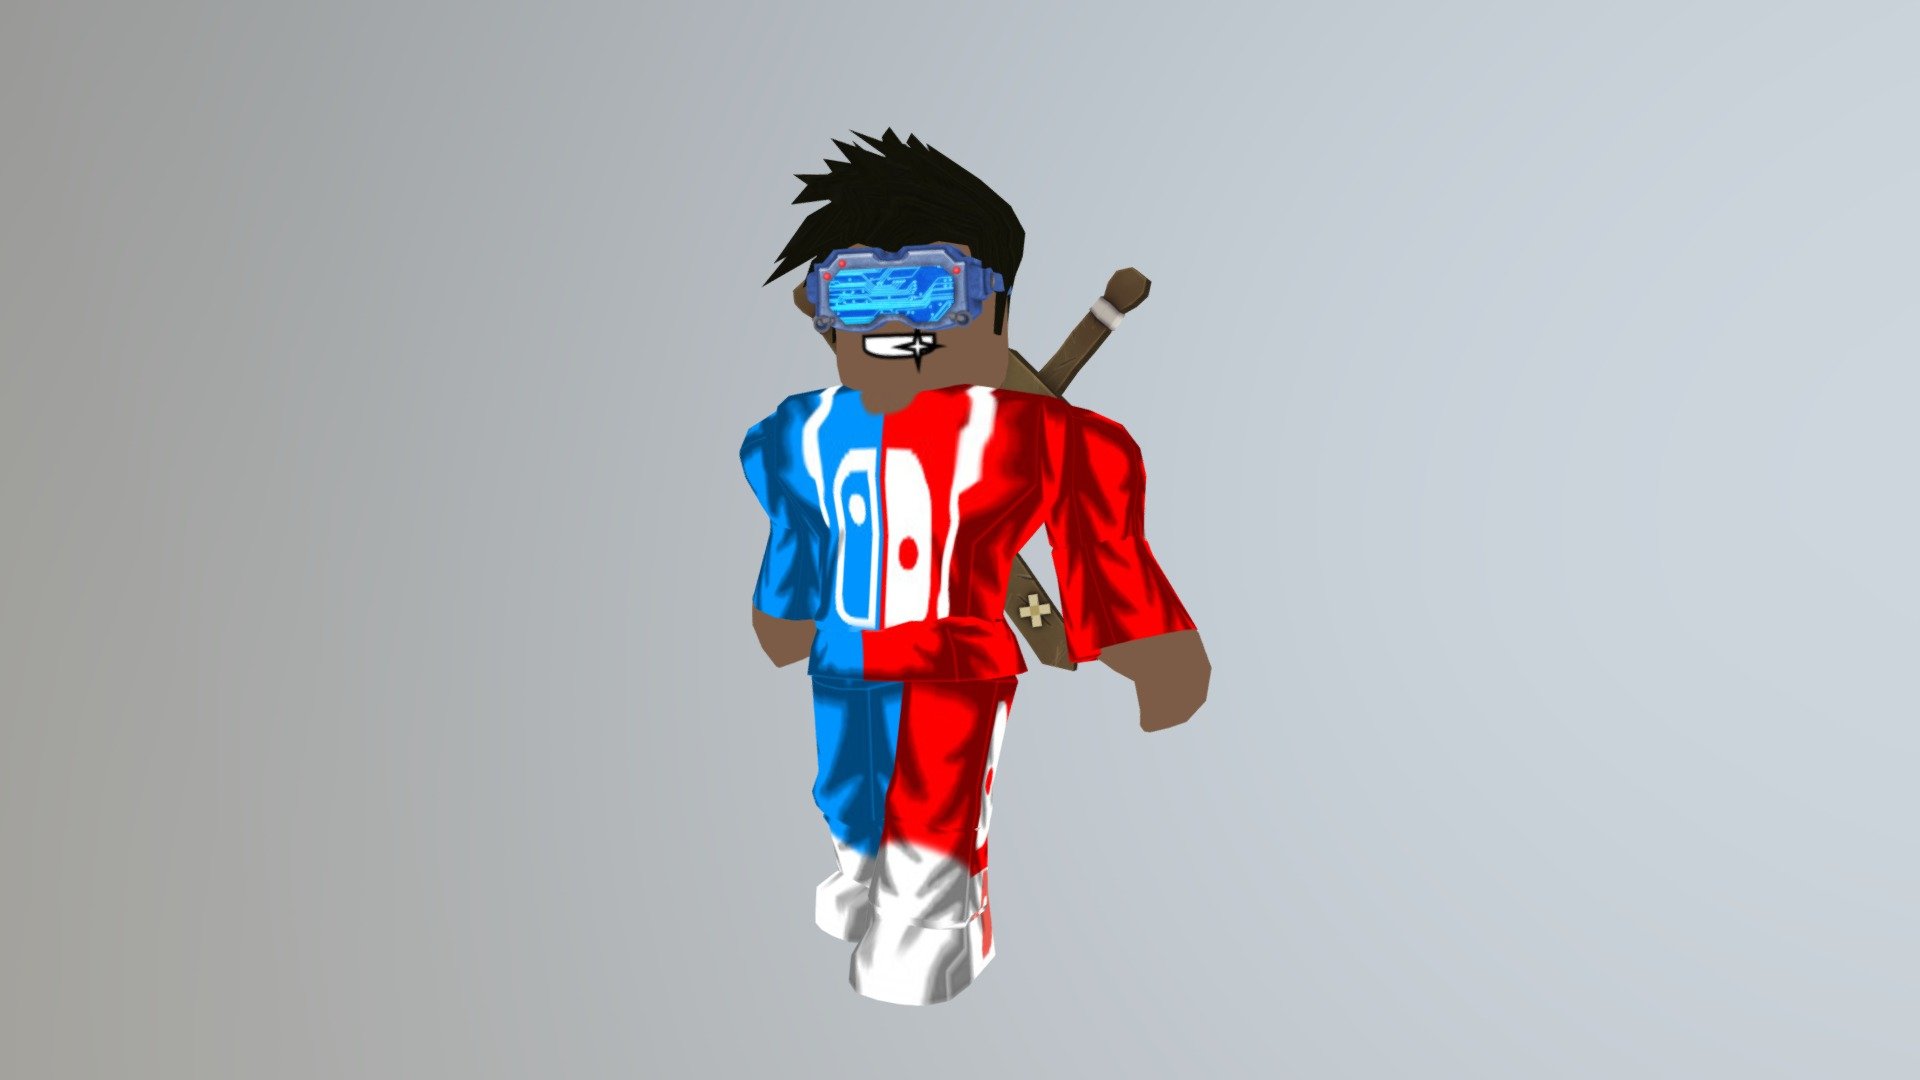 ahmed nishath add photo show me a picture of a roblox character